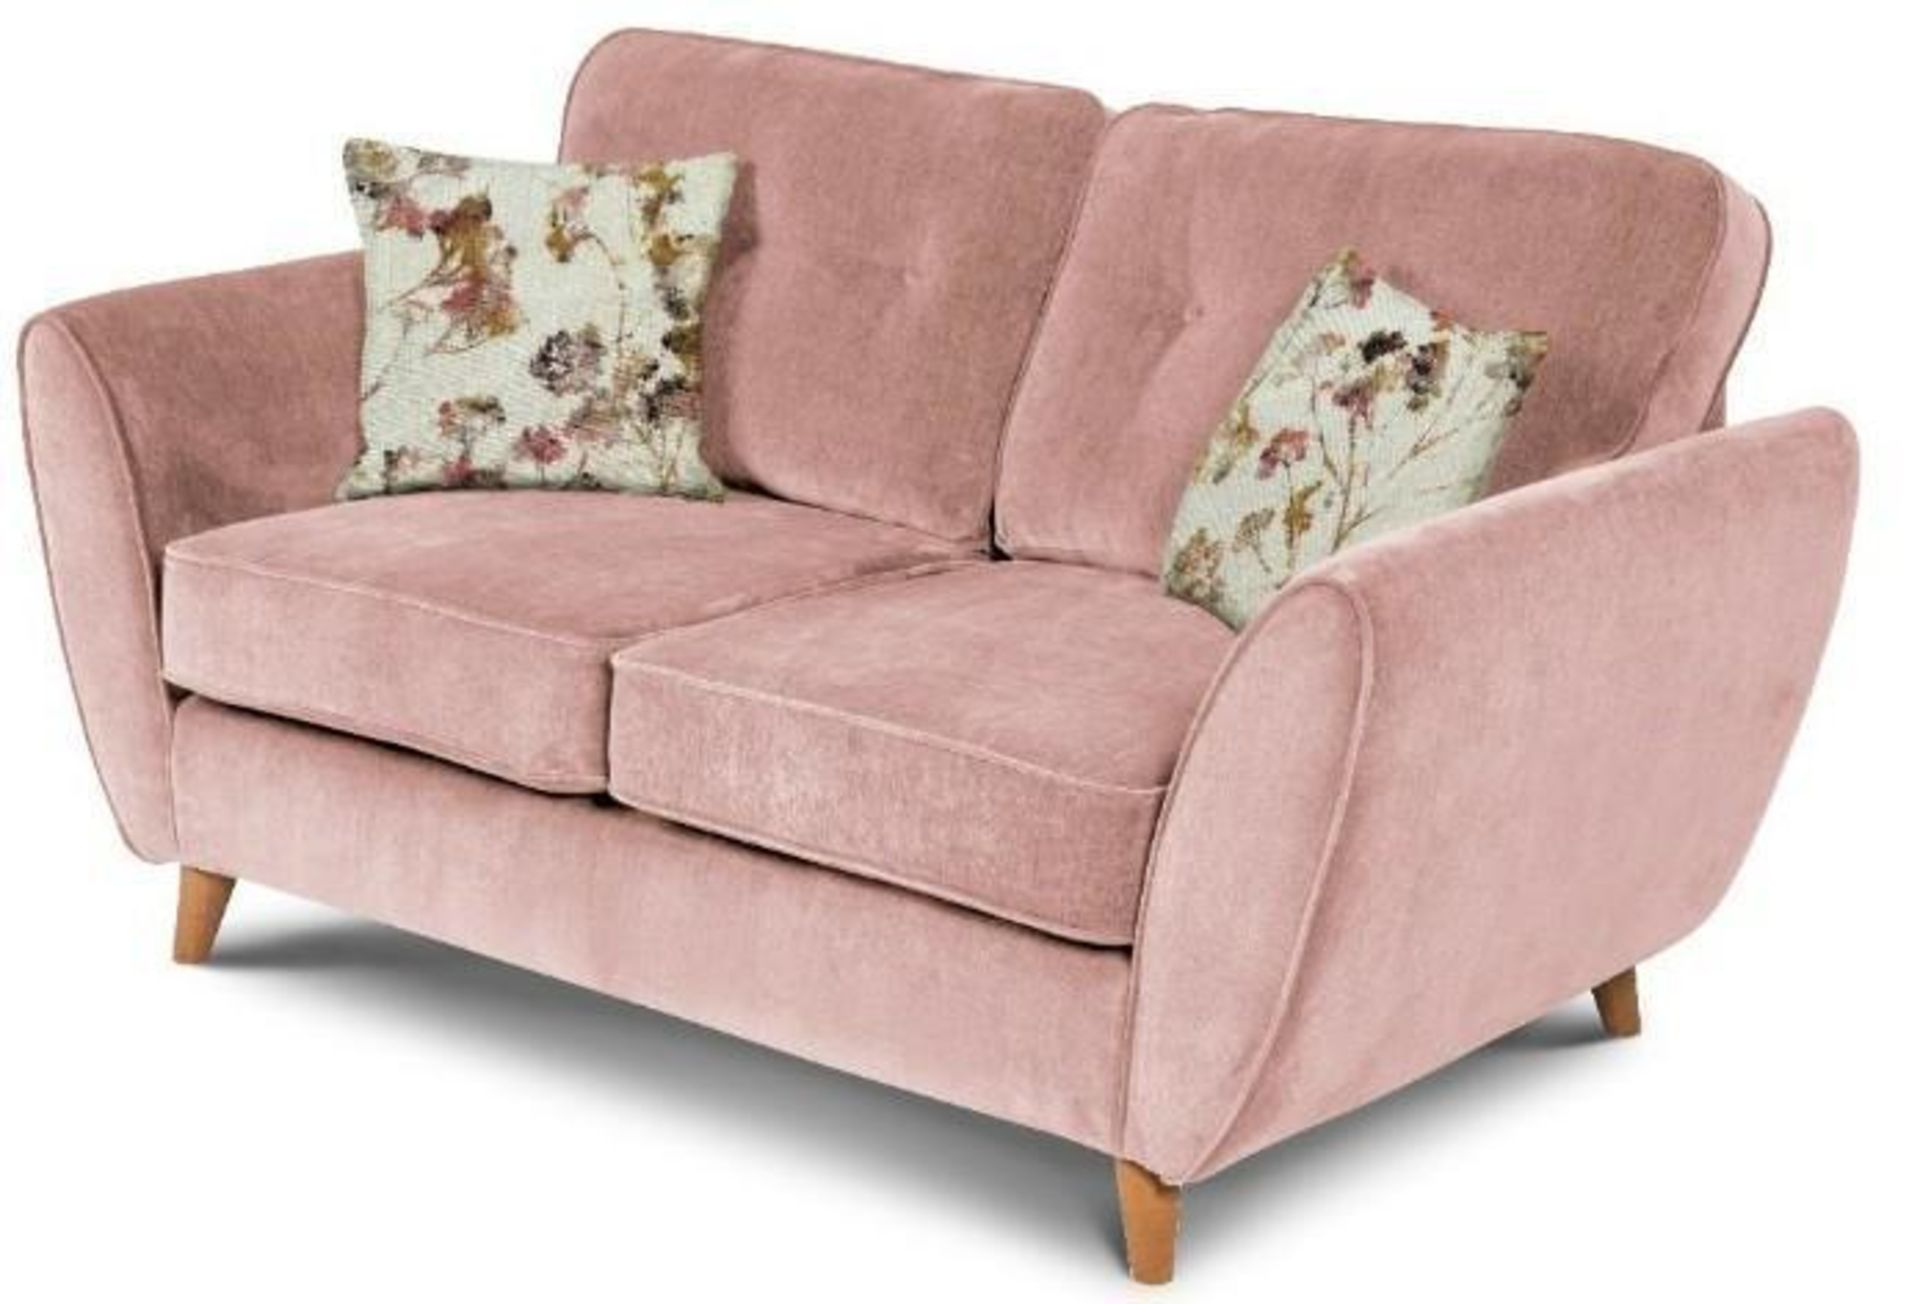 BRAND NEW Olivia 2 seater sofa in pink. RRP: £699